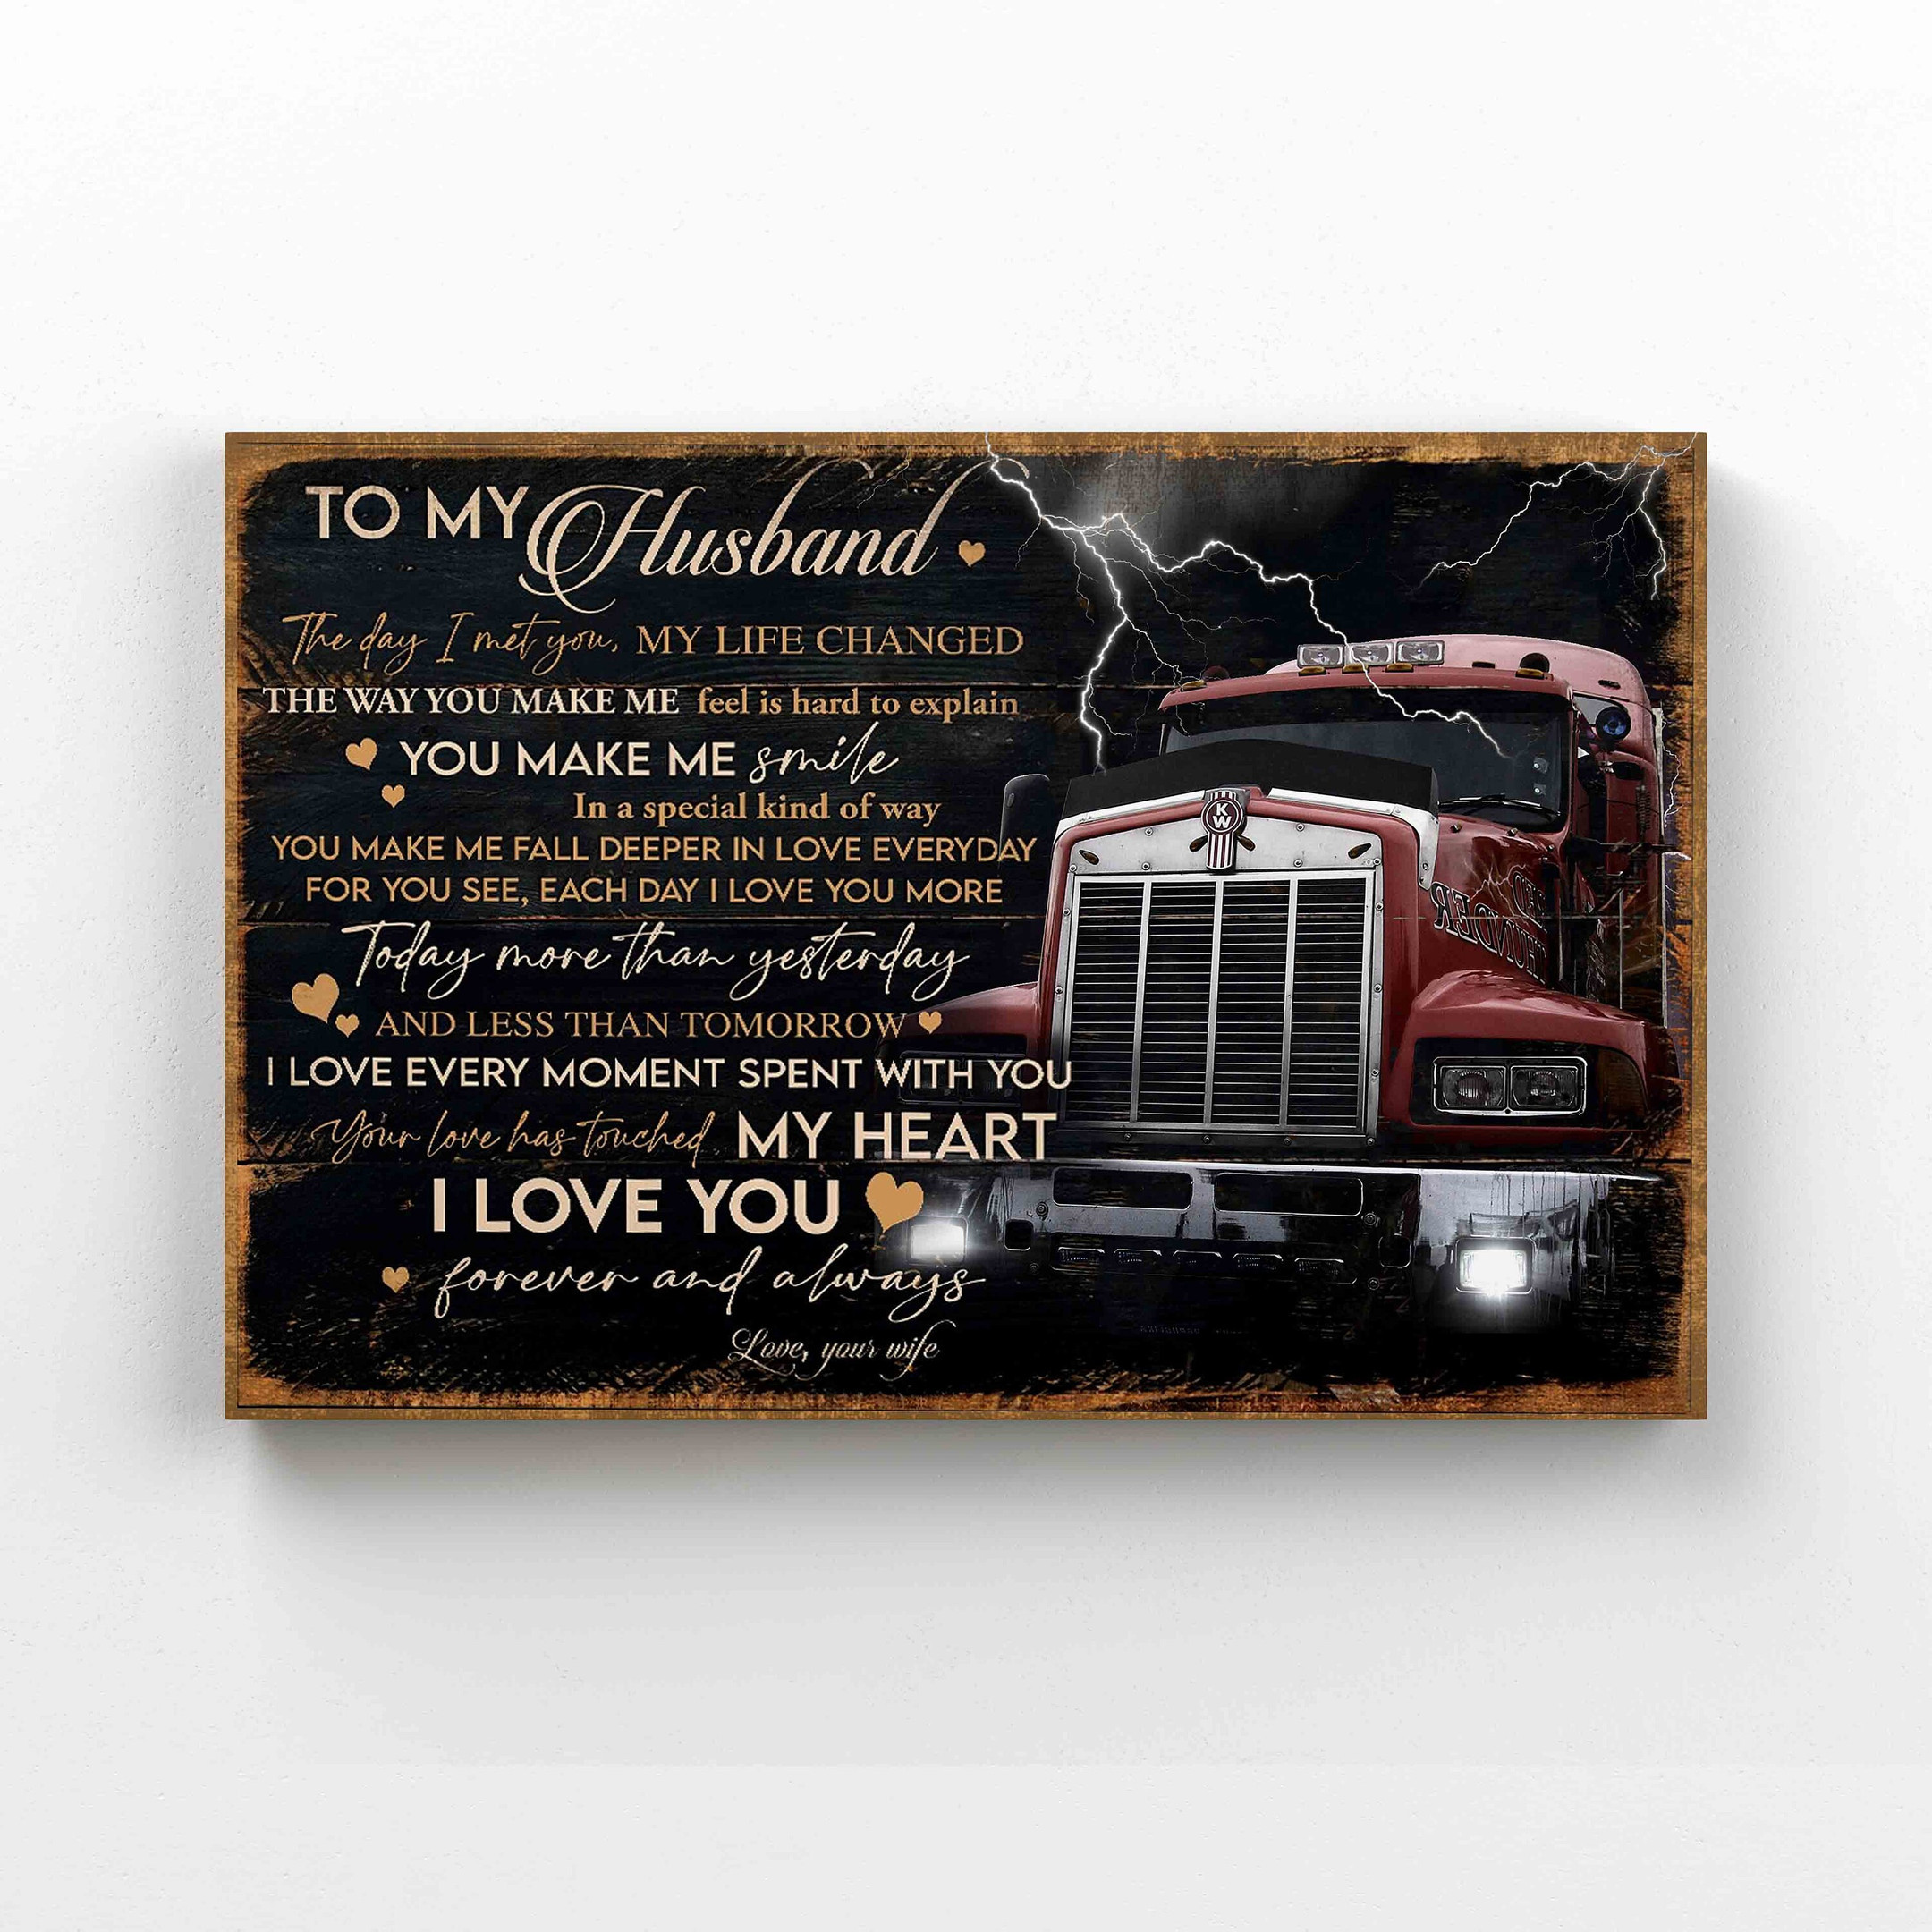 Personalized Name Canvas, To My Husband Canvas, I Love You Forever And Always Canvas, Freightliner Canvas, Family Canvas, Wedding Canvas